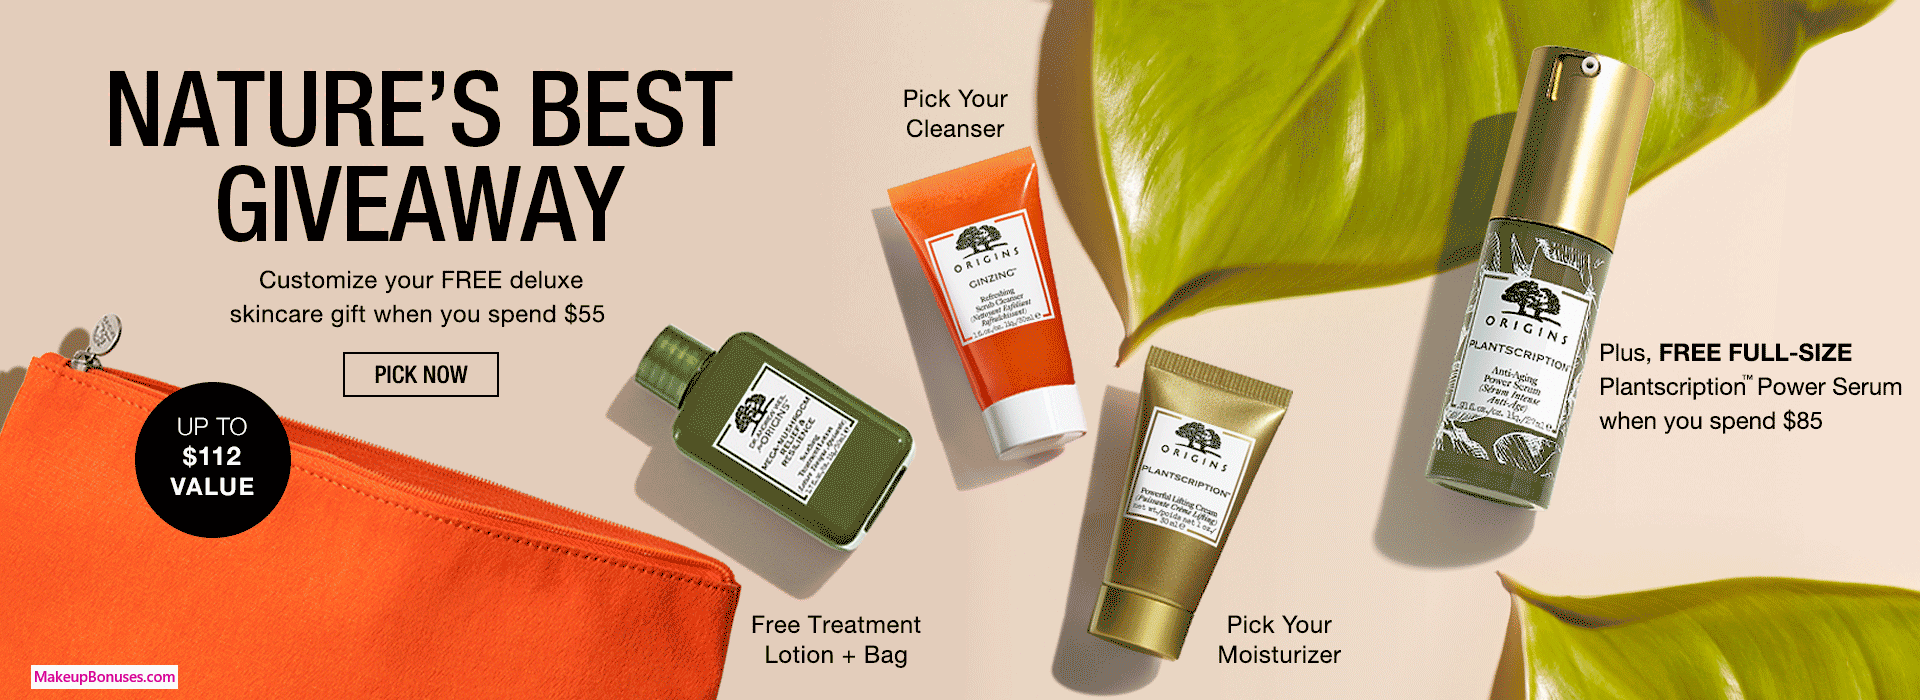 Receive a free 5-pc gift with $85 Origins purchase